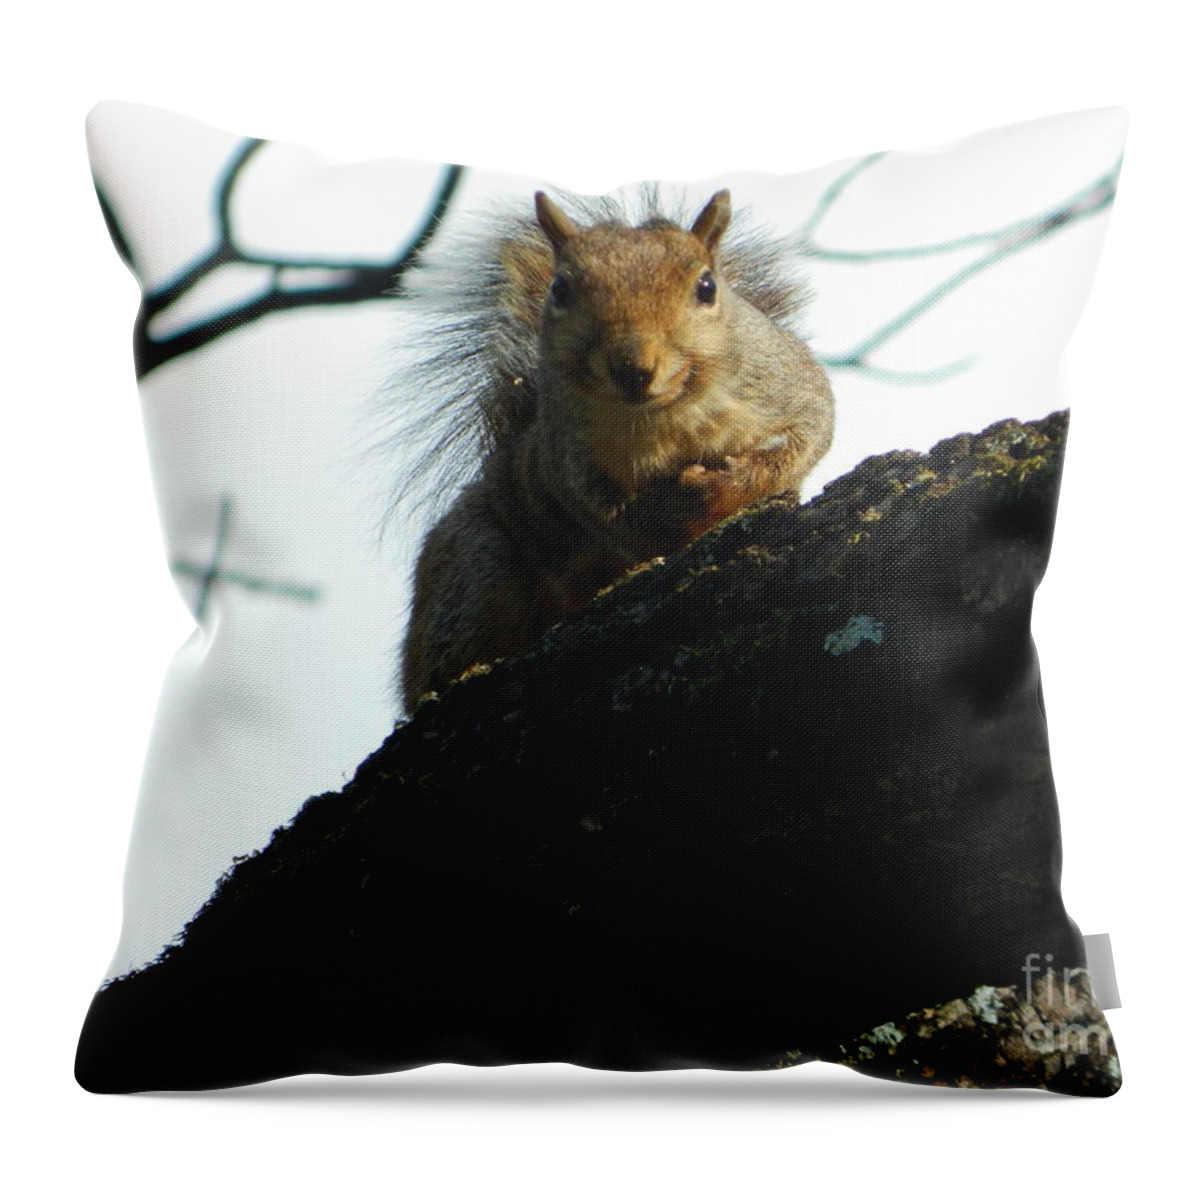 Squirrel Throw Pillow featuring the photograph I See You by Emmy Vickers